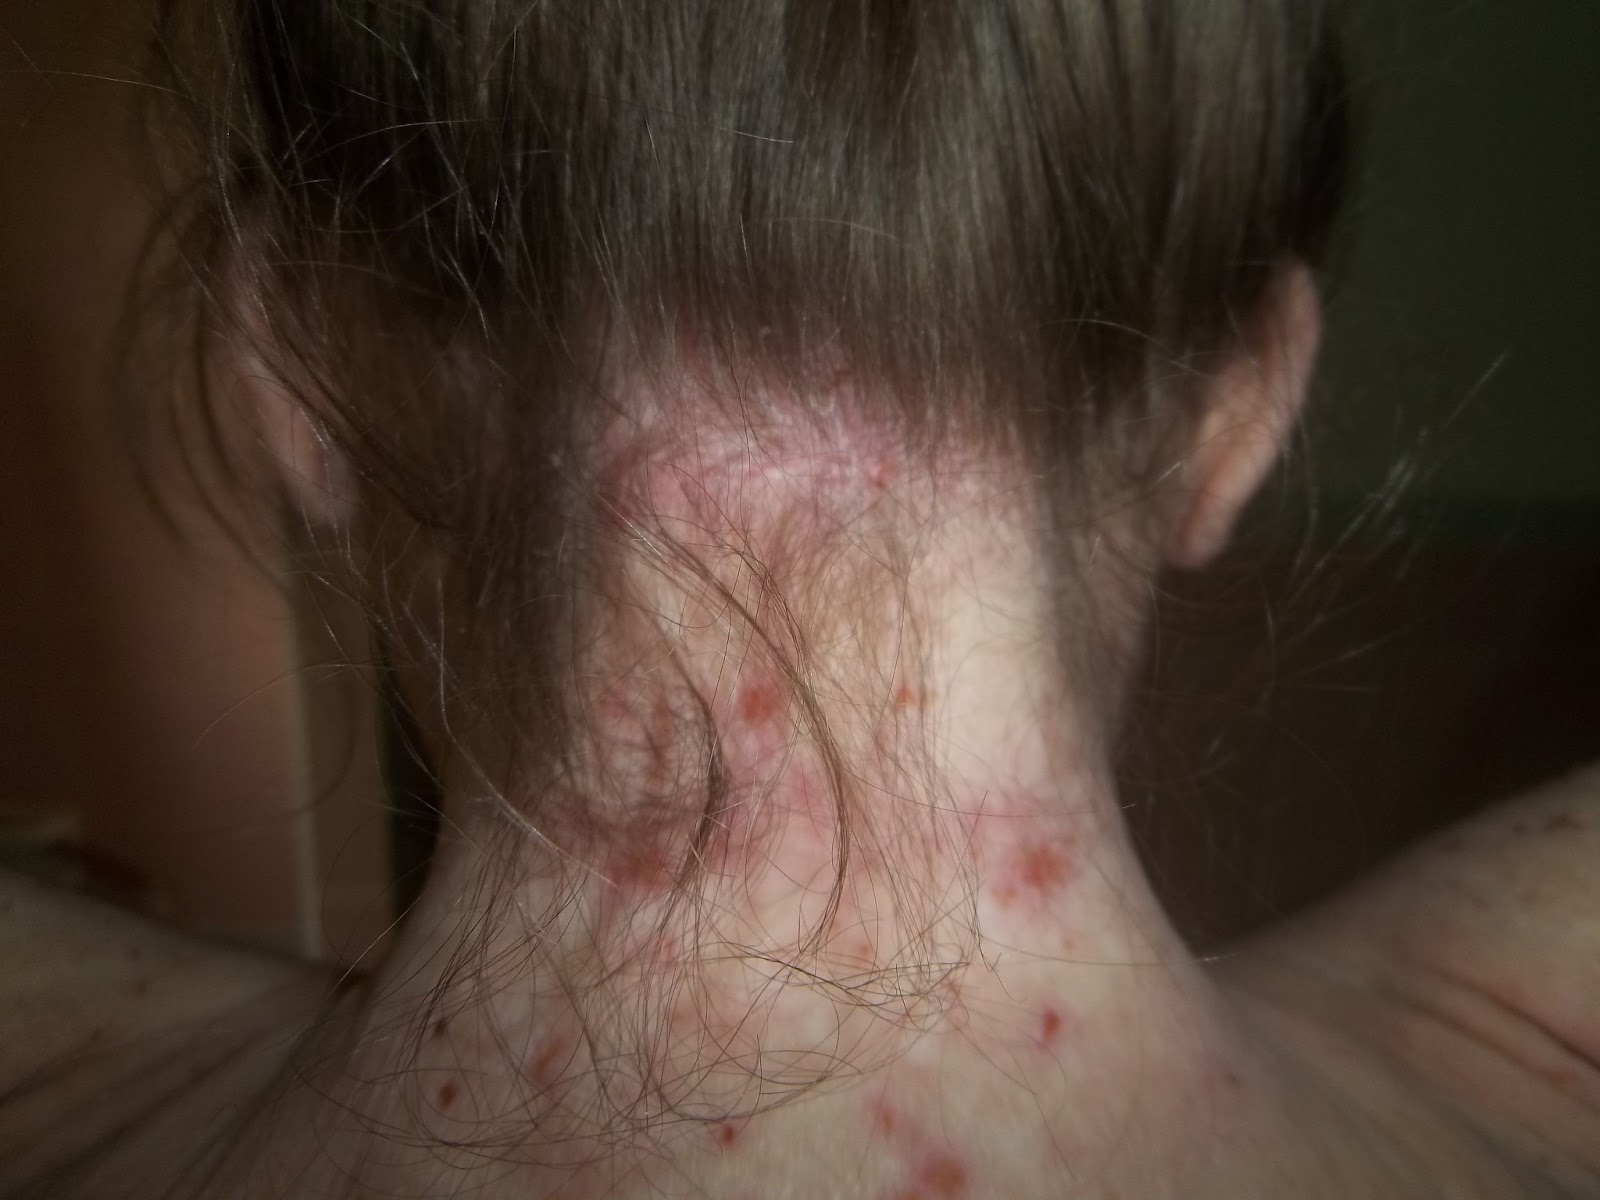 Answers to Bump on back of neck near hairline - DoctorBase